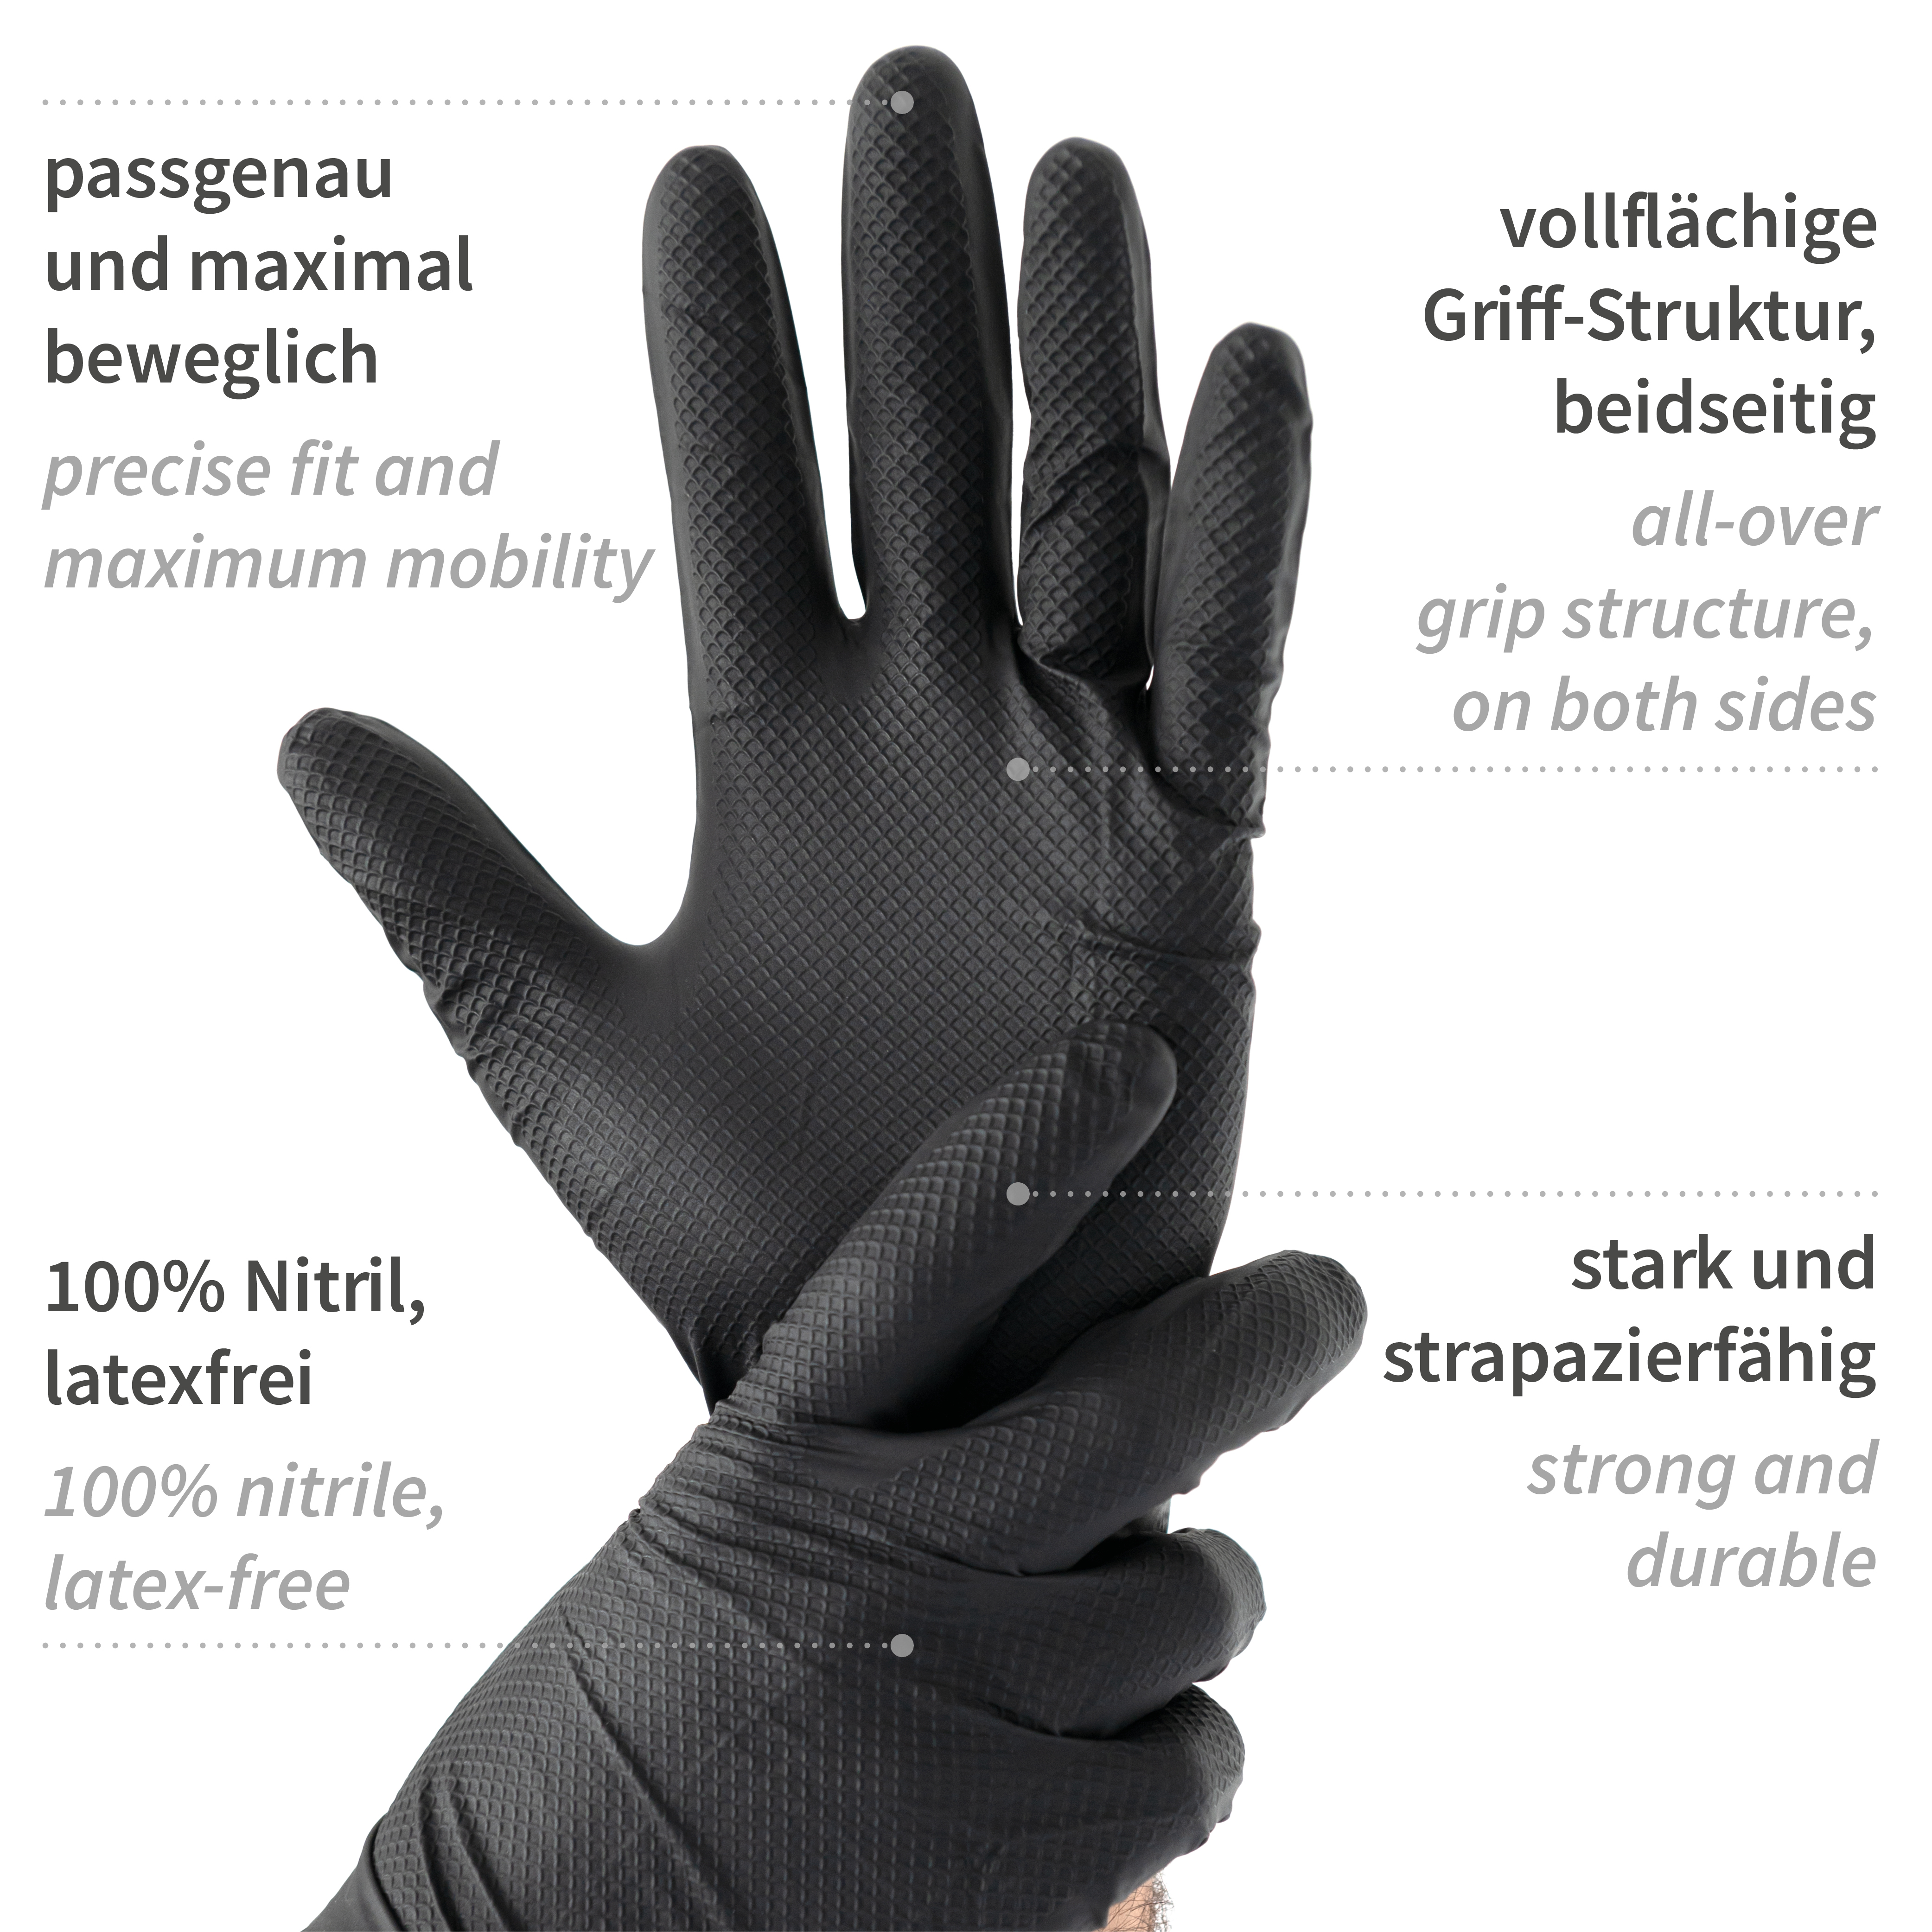 Nitrile gloves Power Grip, powder-free in black with explanation